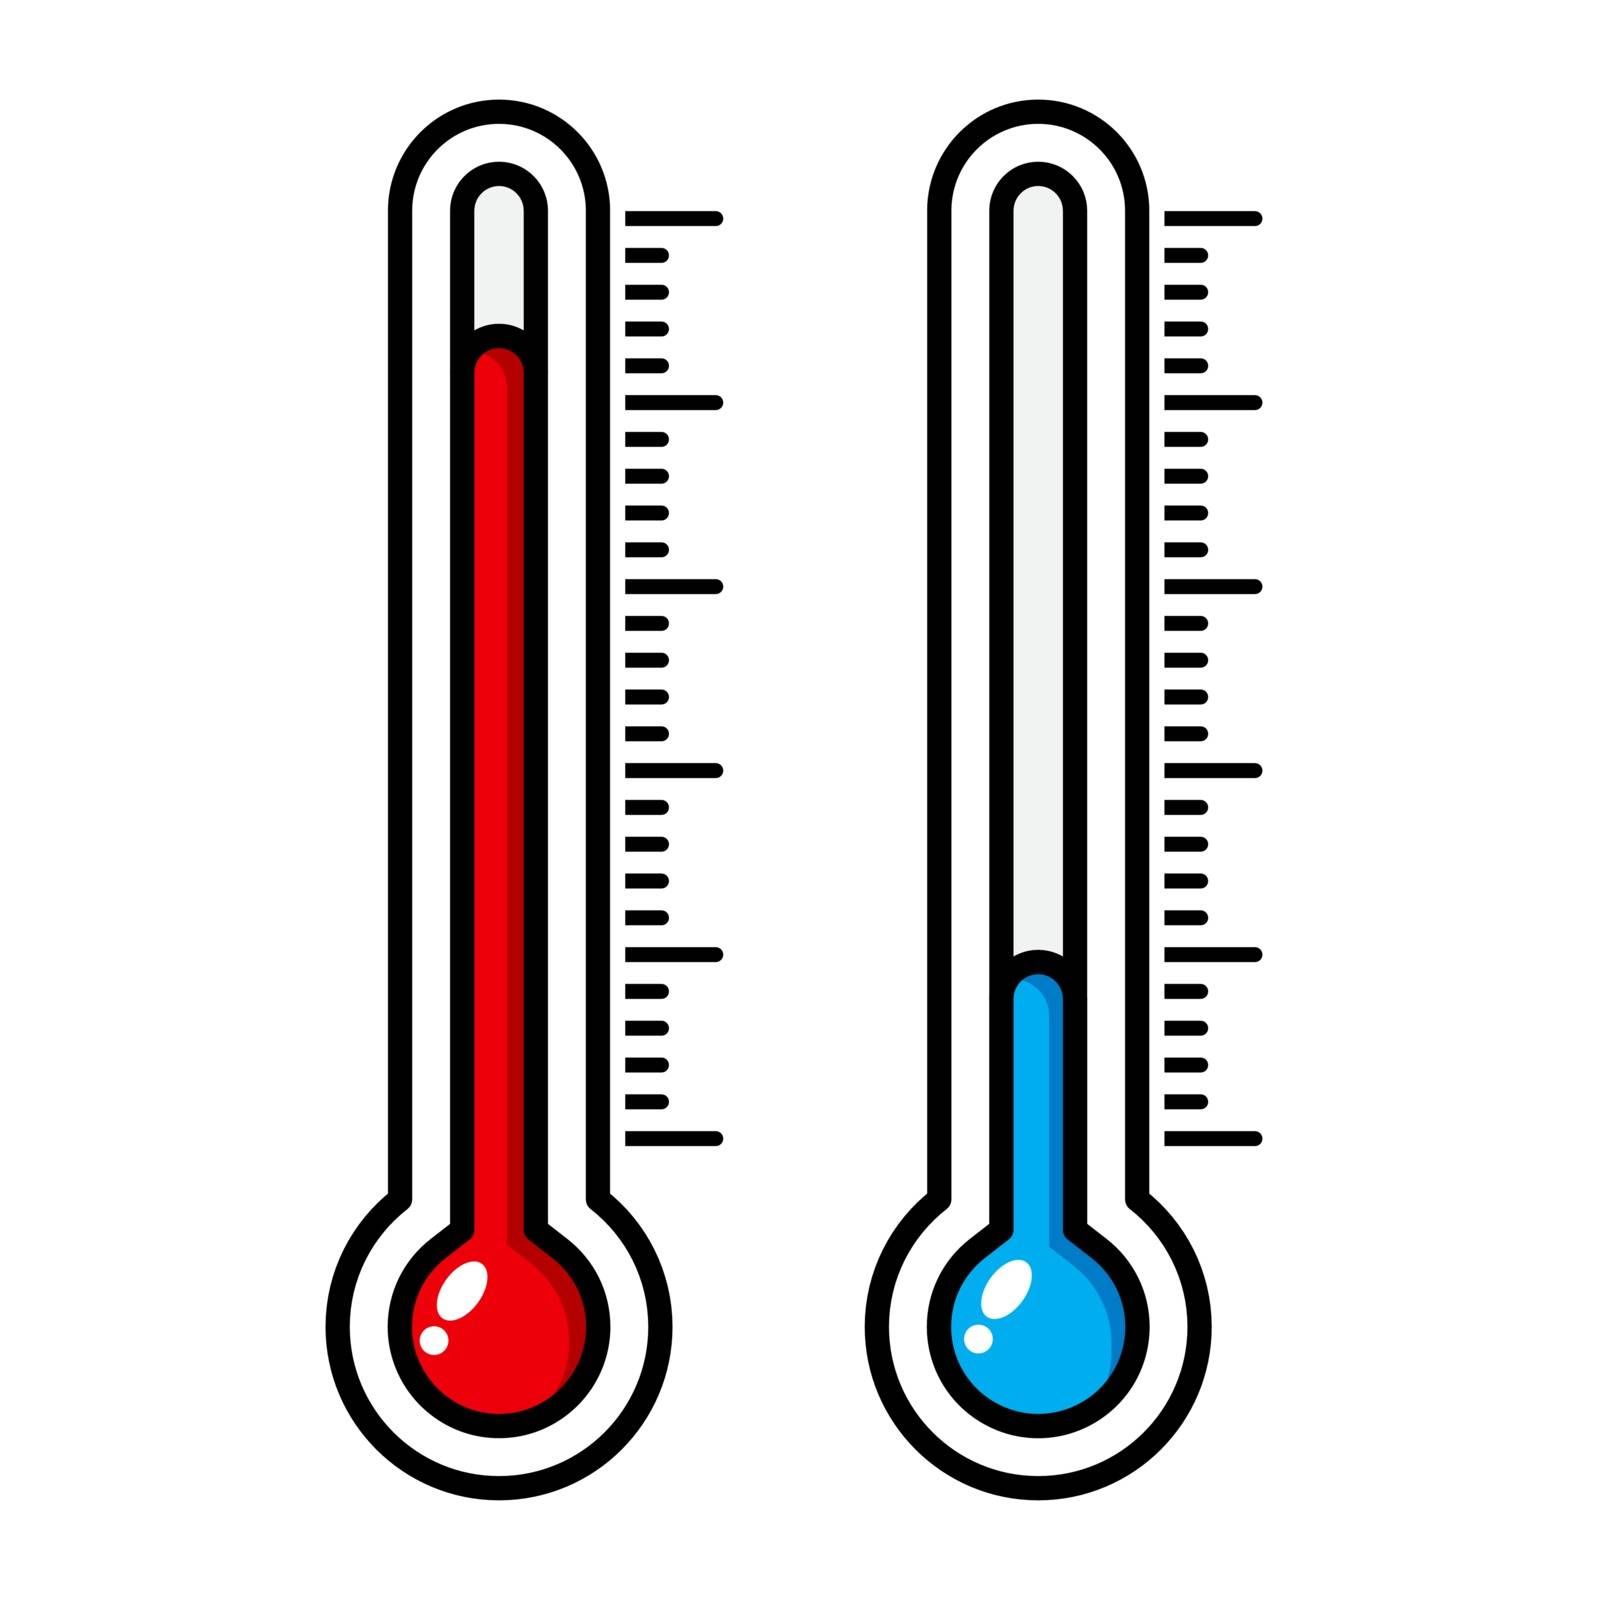 Thermometer cartoon illustration isolated on white. Meteorology thermostat vector icon. Measure level: warm and cold. Temperature measurement. Blue and red weather measuring indicator. 